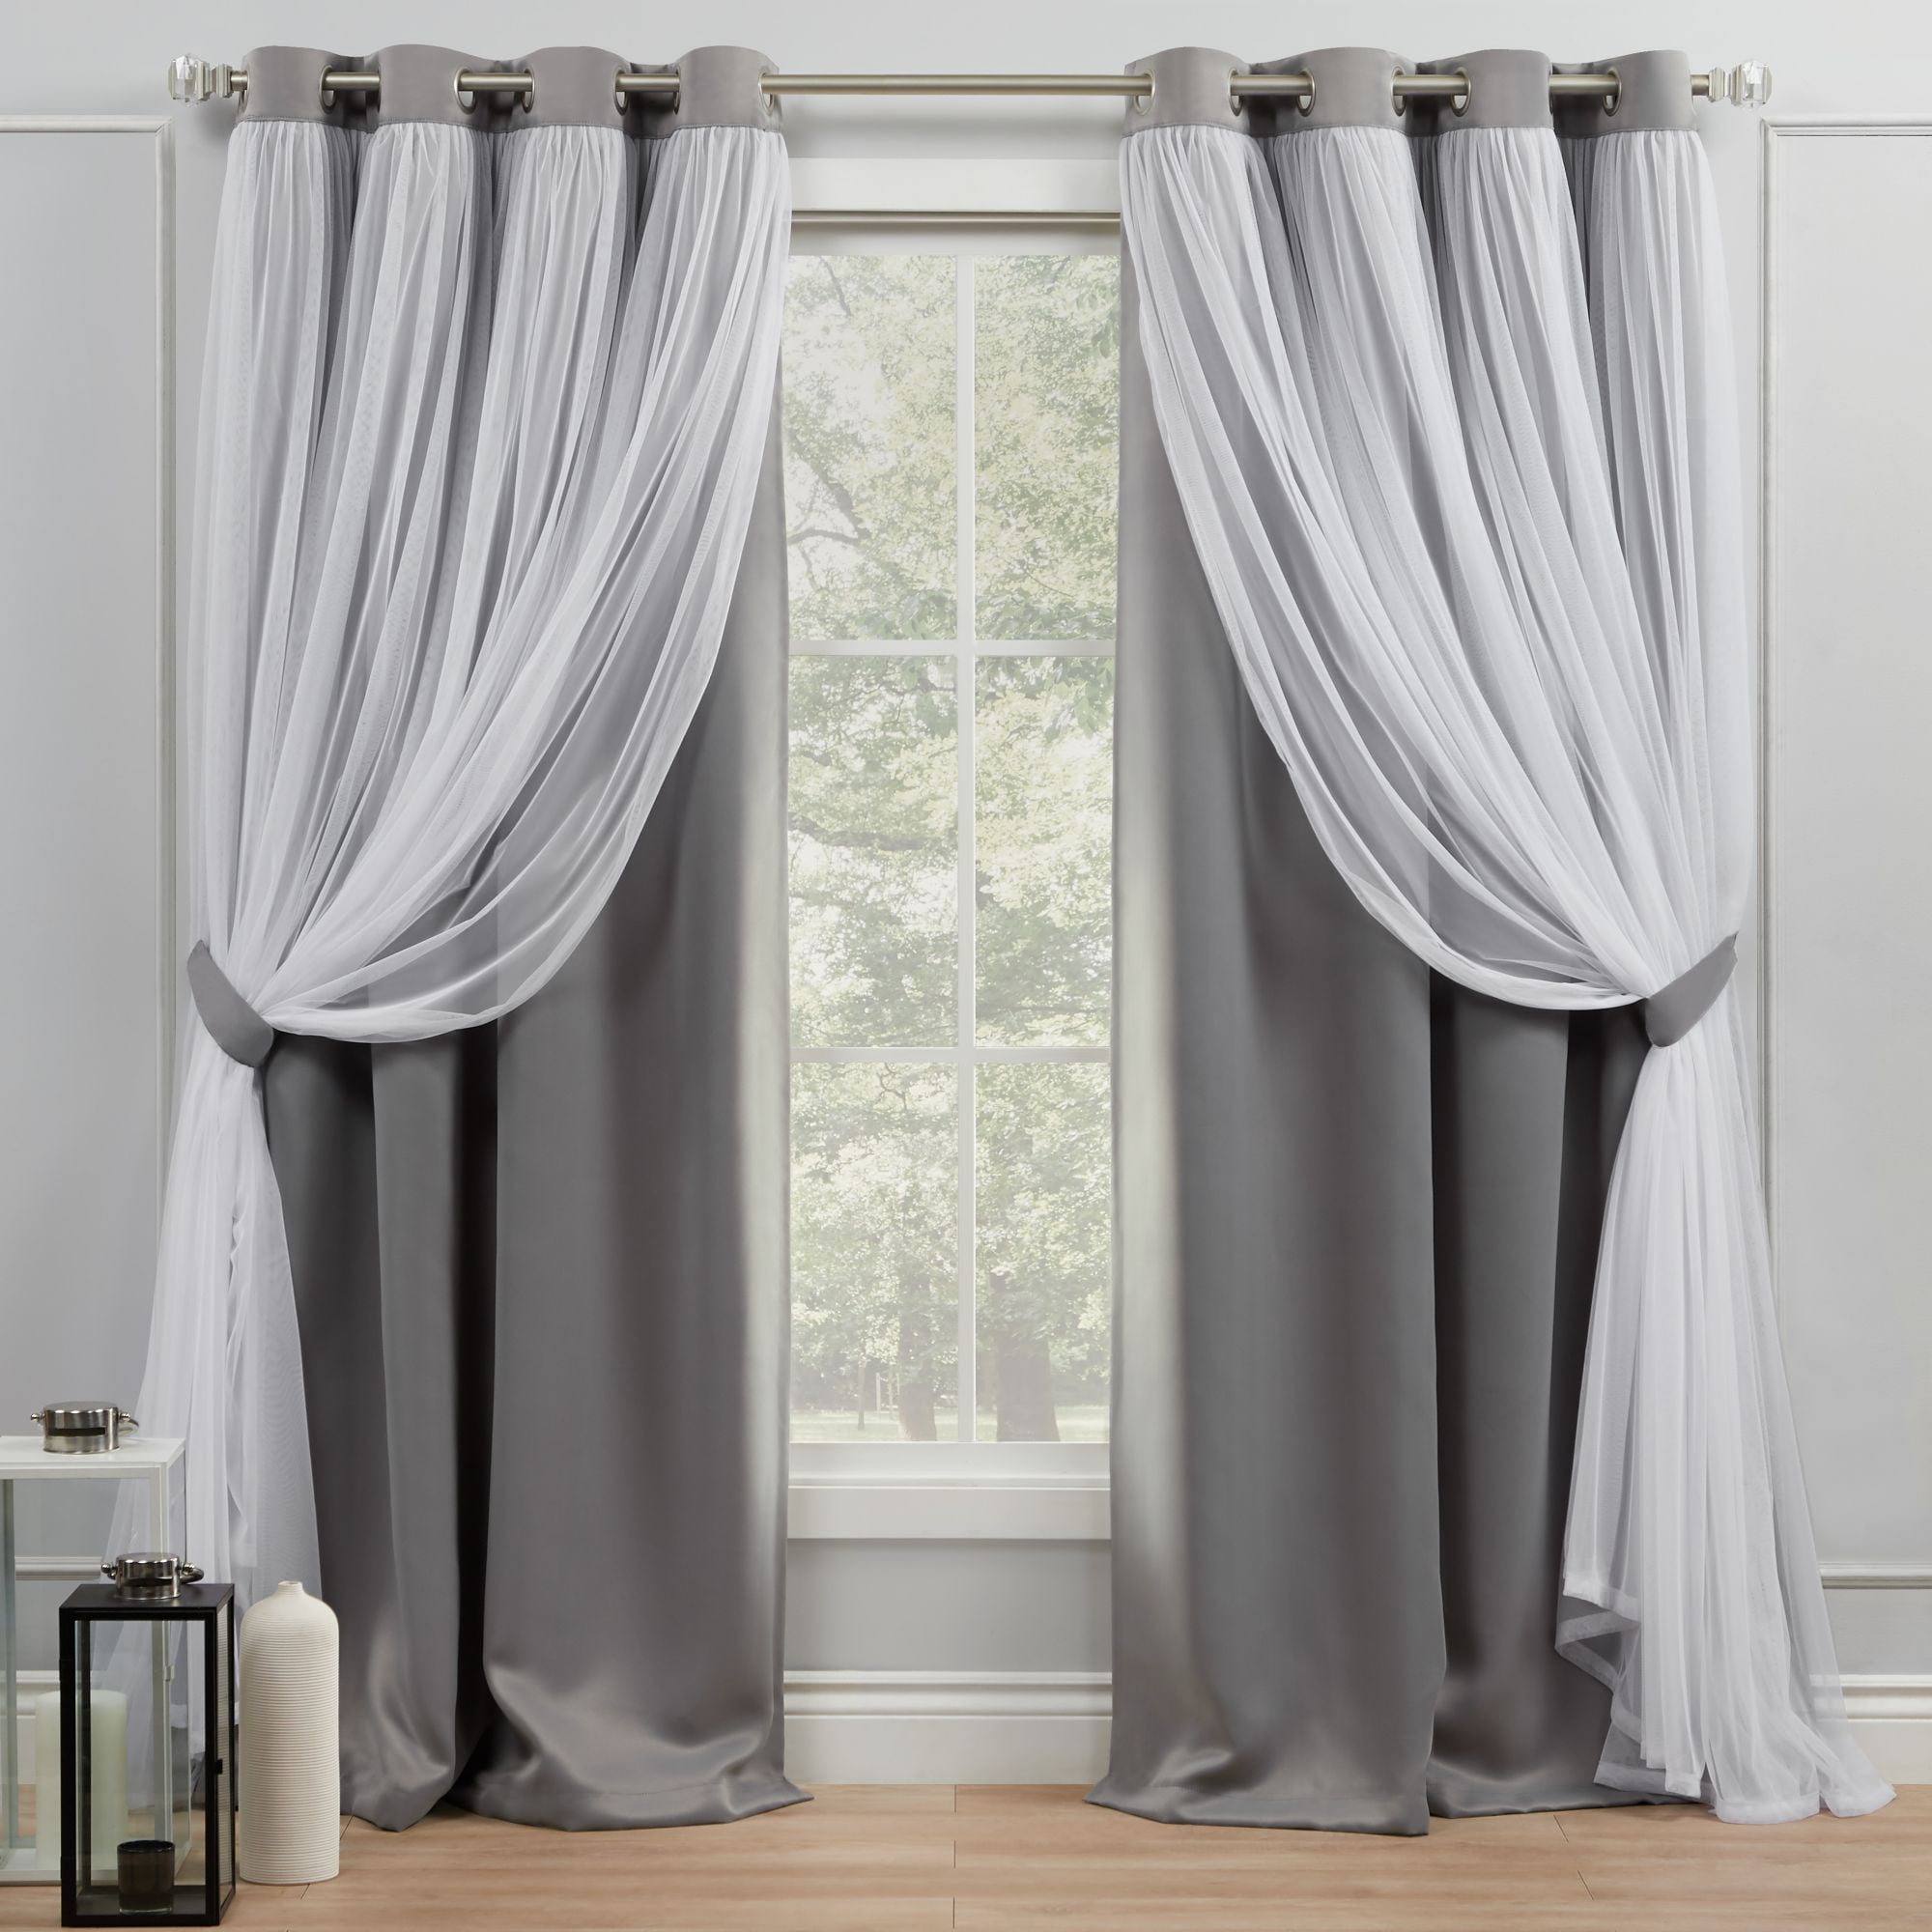 Ready Made Home Textile Antique Crystal Curtain - Buy Ready Made Home  Textile Antique Crystal Curtain Product on